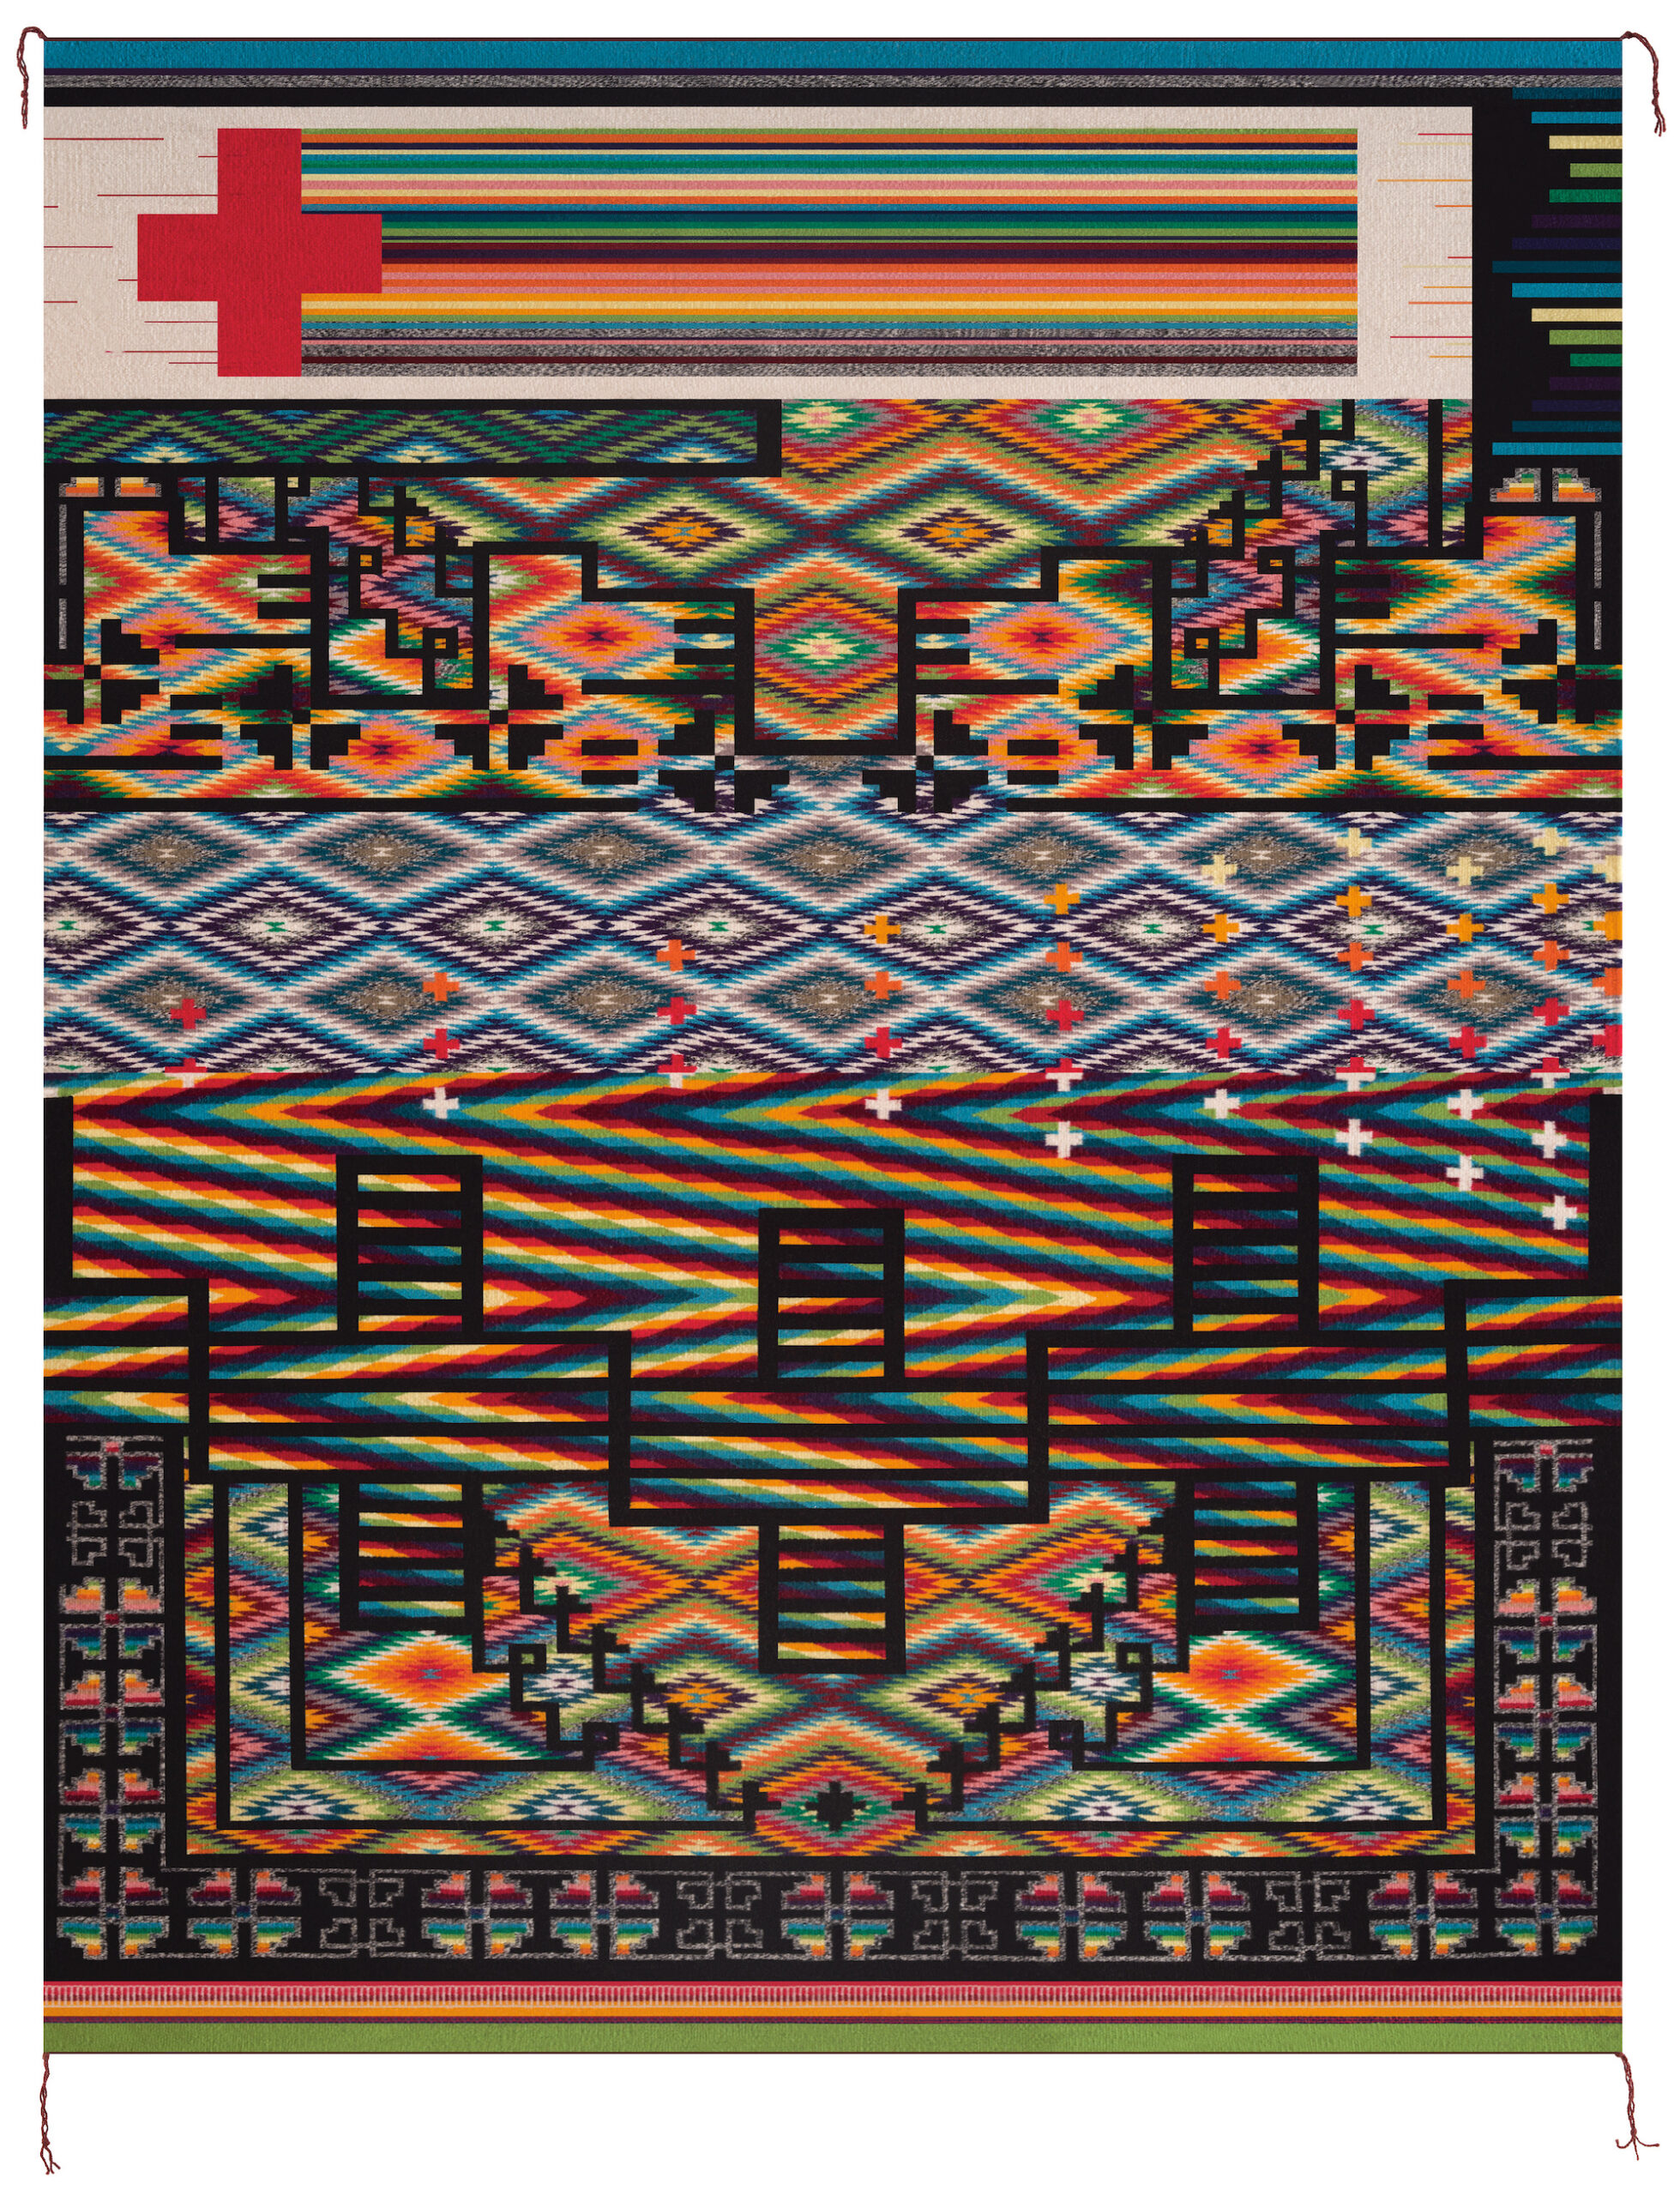 A geometrically patterned textile weaving.